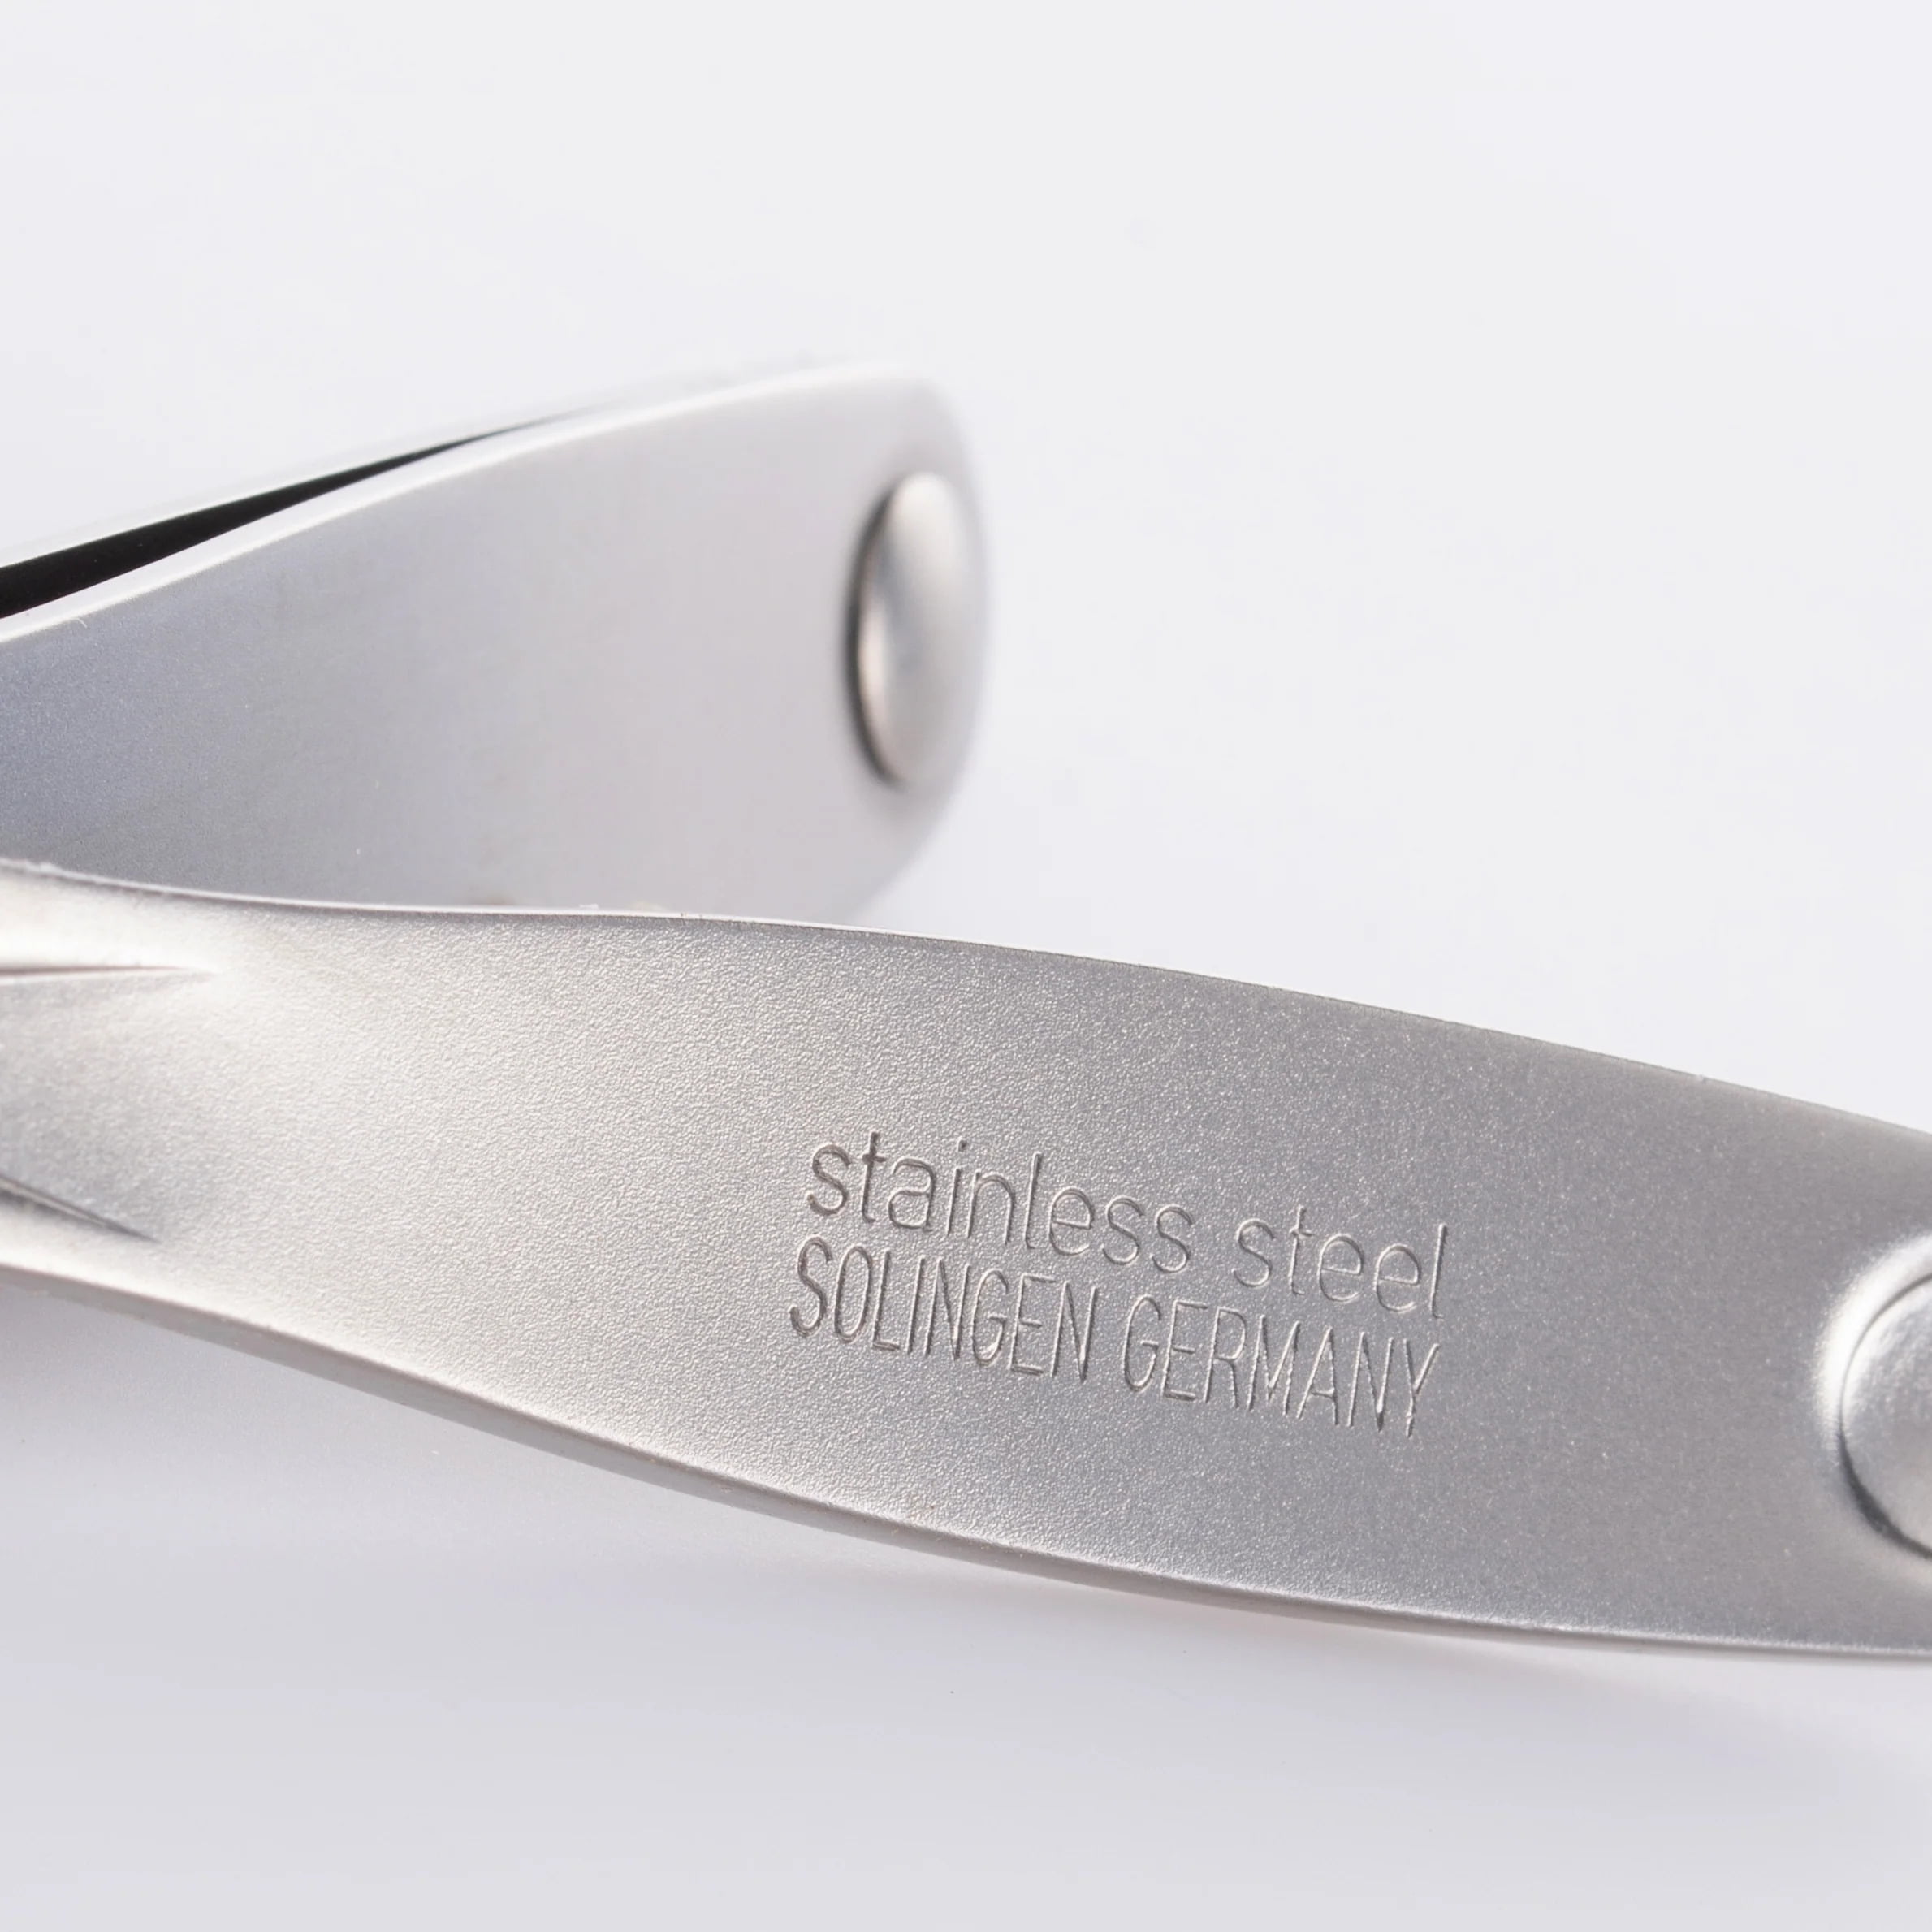 The Ring Lock System® Stainless Steel Fingernail Clipper 6cm by Premax®,  Italy | eBay